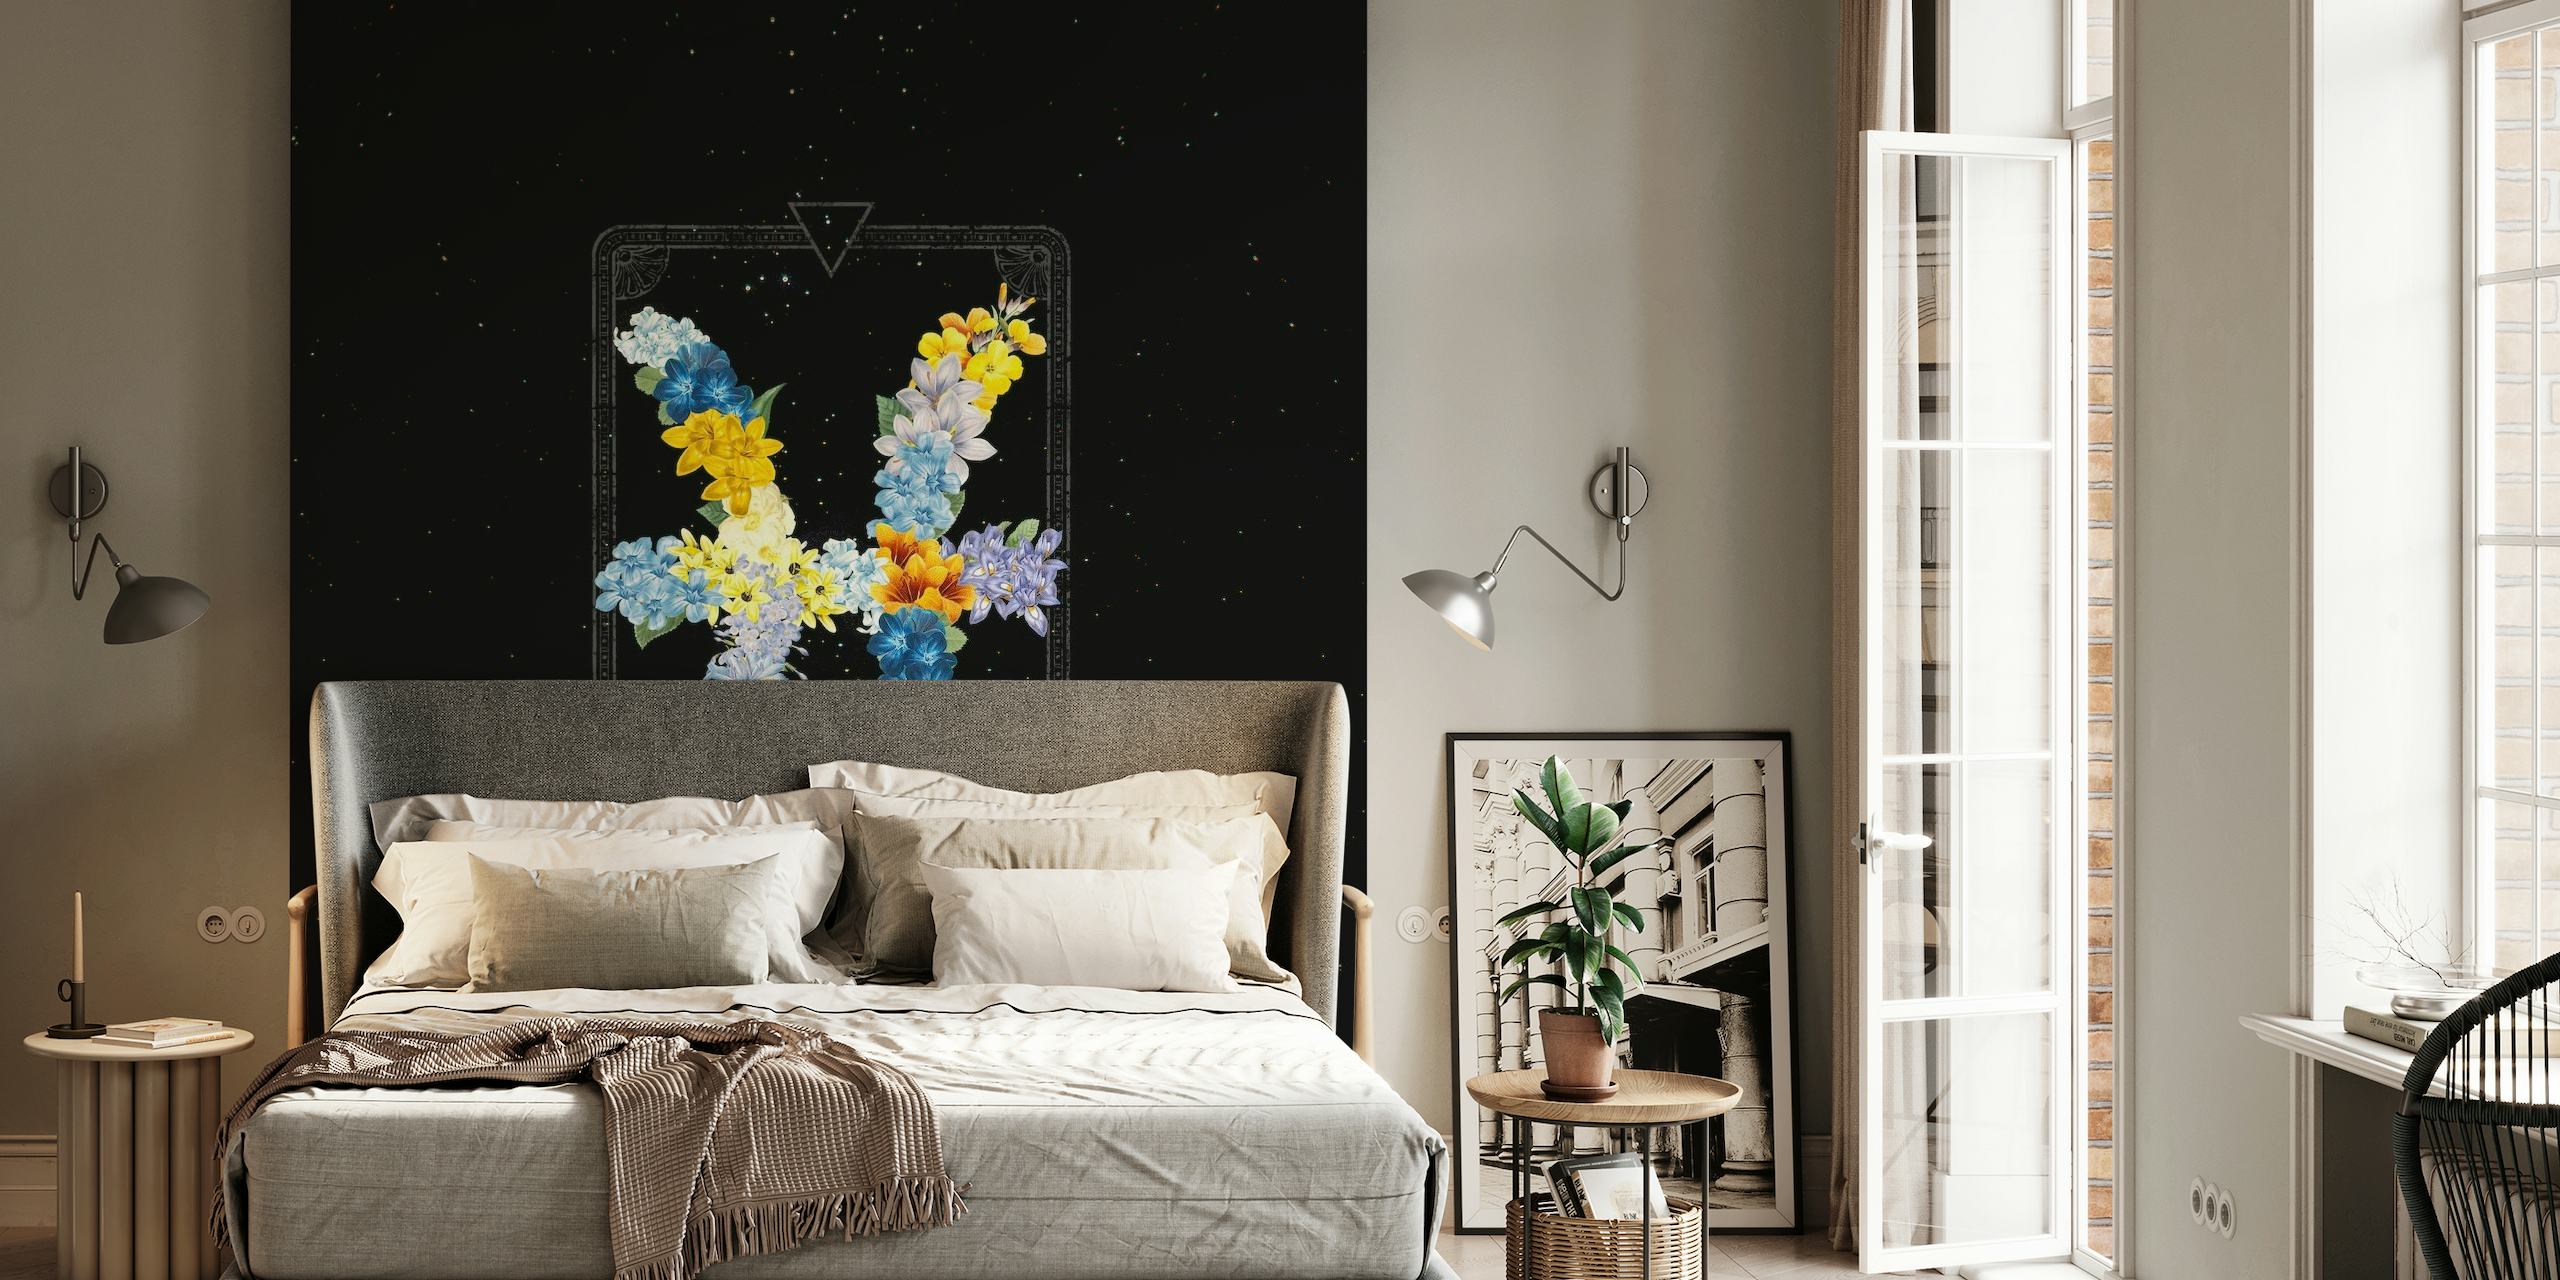 Pisces zodiac sign floral pattern wall mural against a starry night backdrop